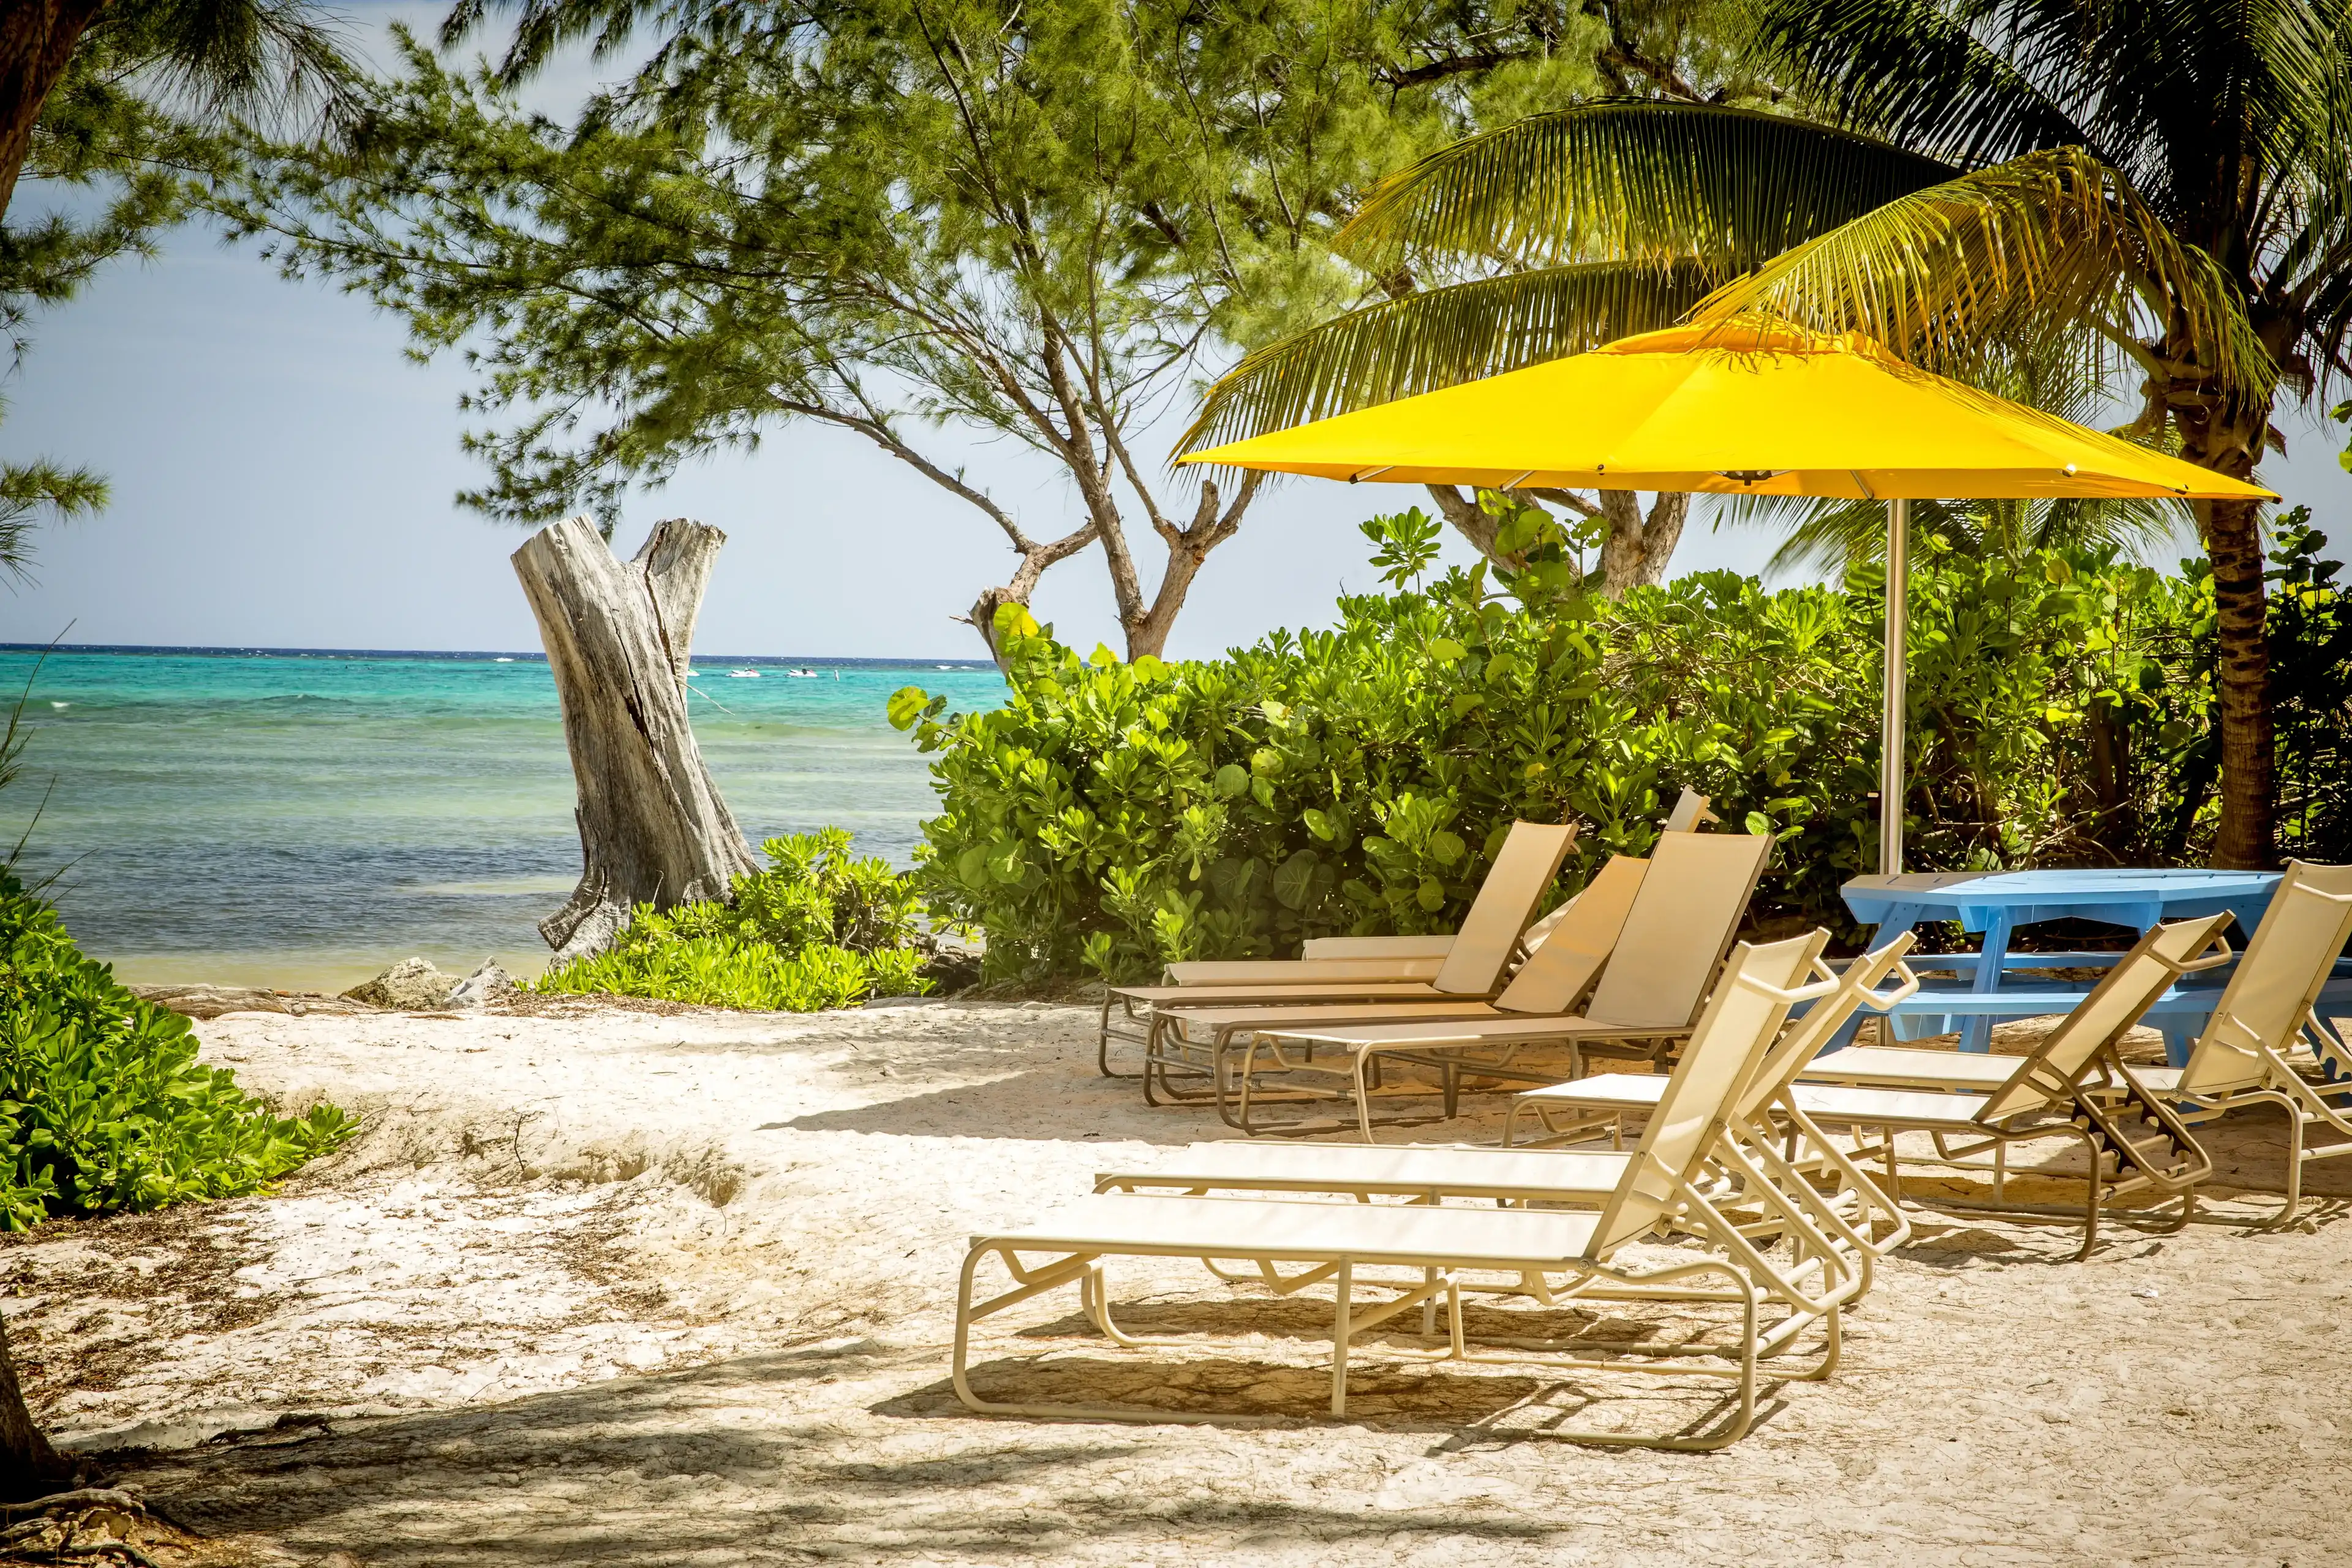 Cayman Islands hotels. Best hotels in the Cayman Islands